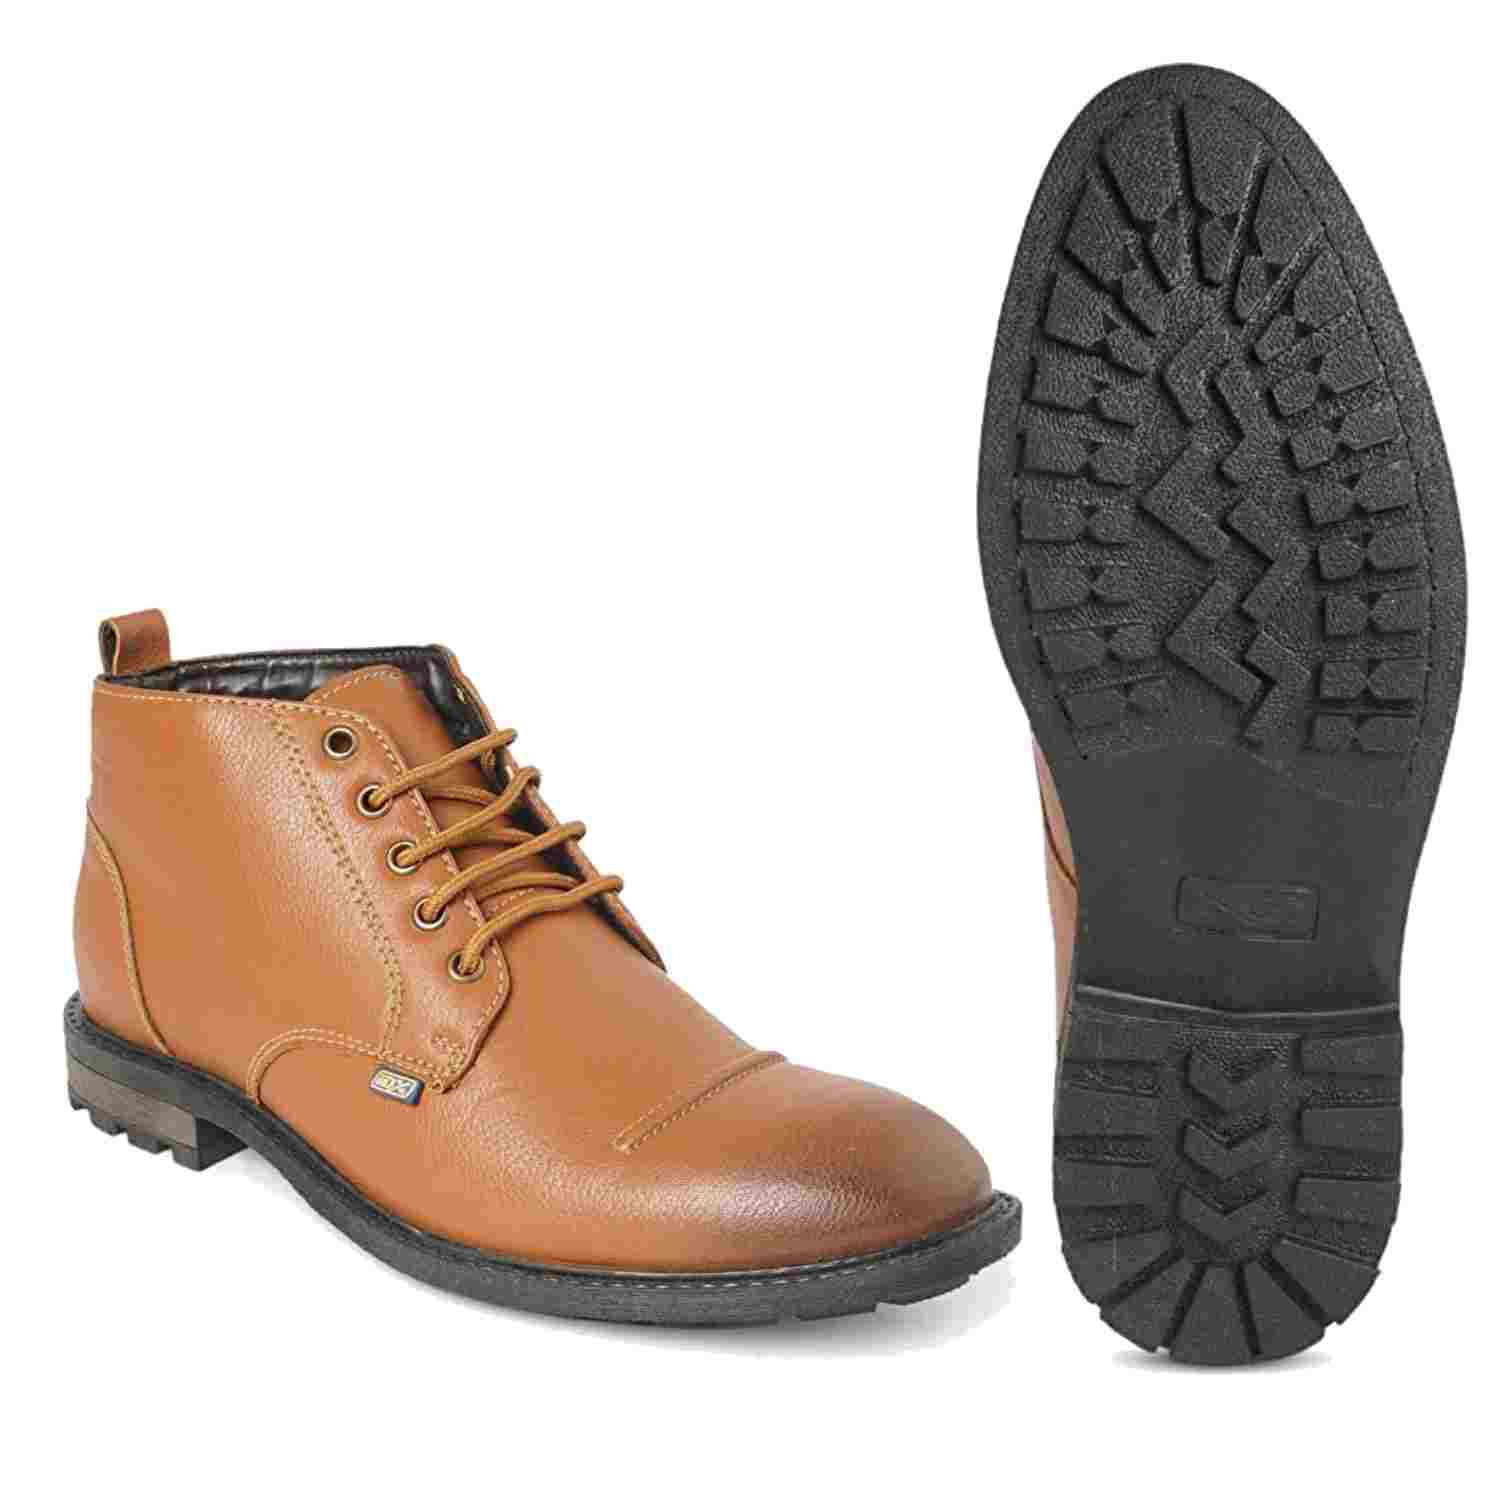 iD Men's Leather Boot